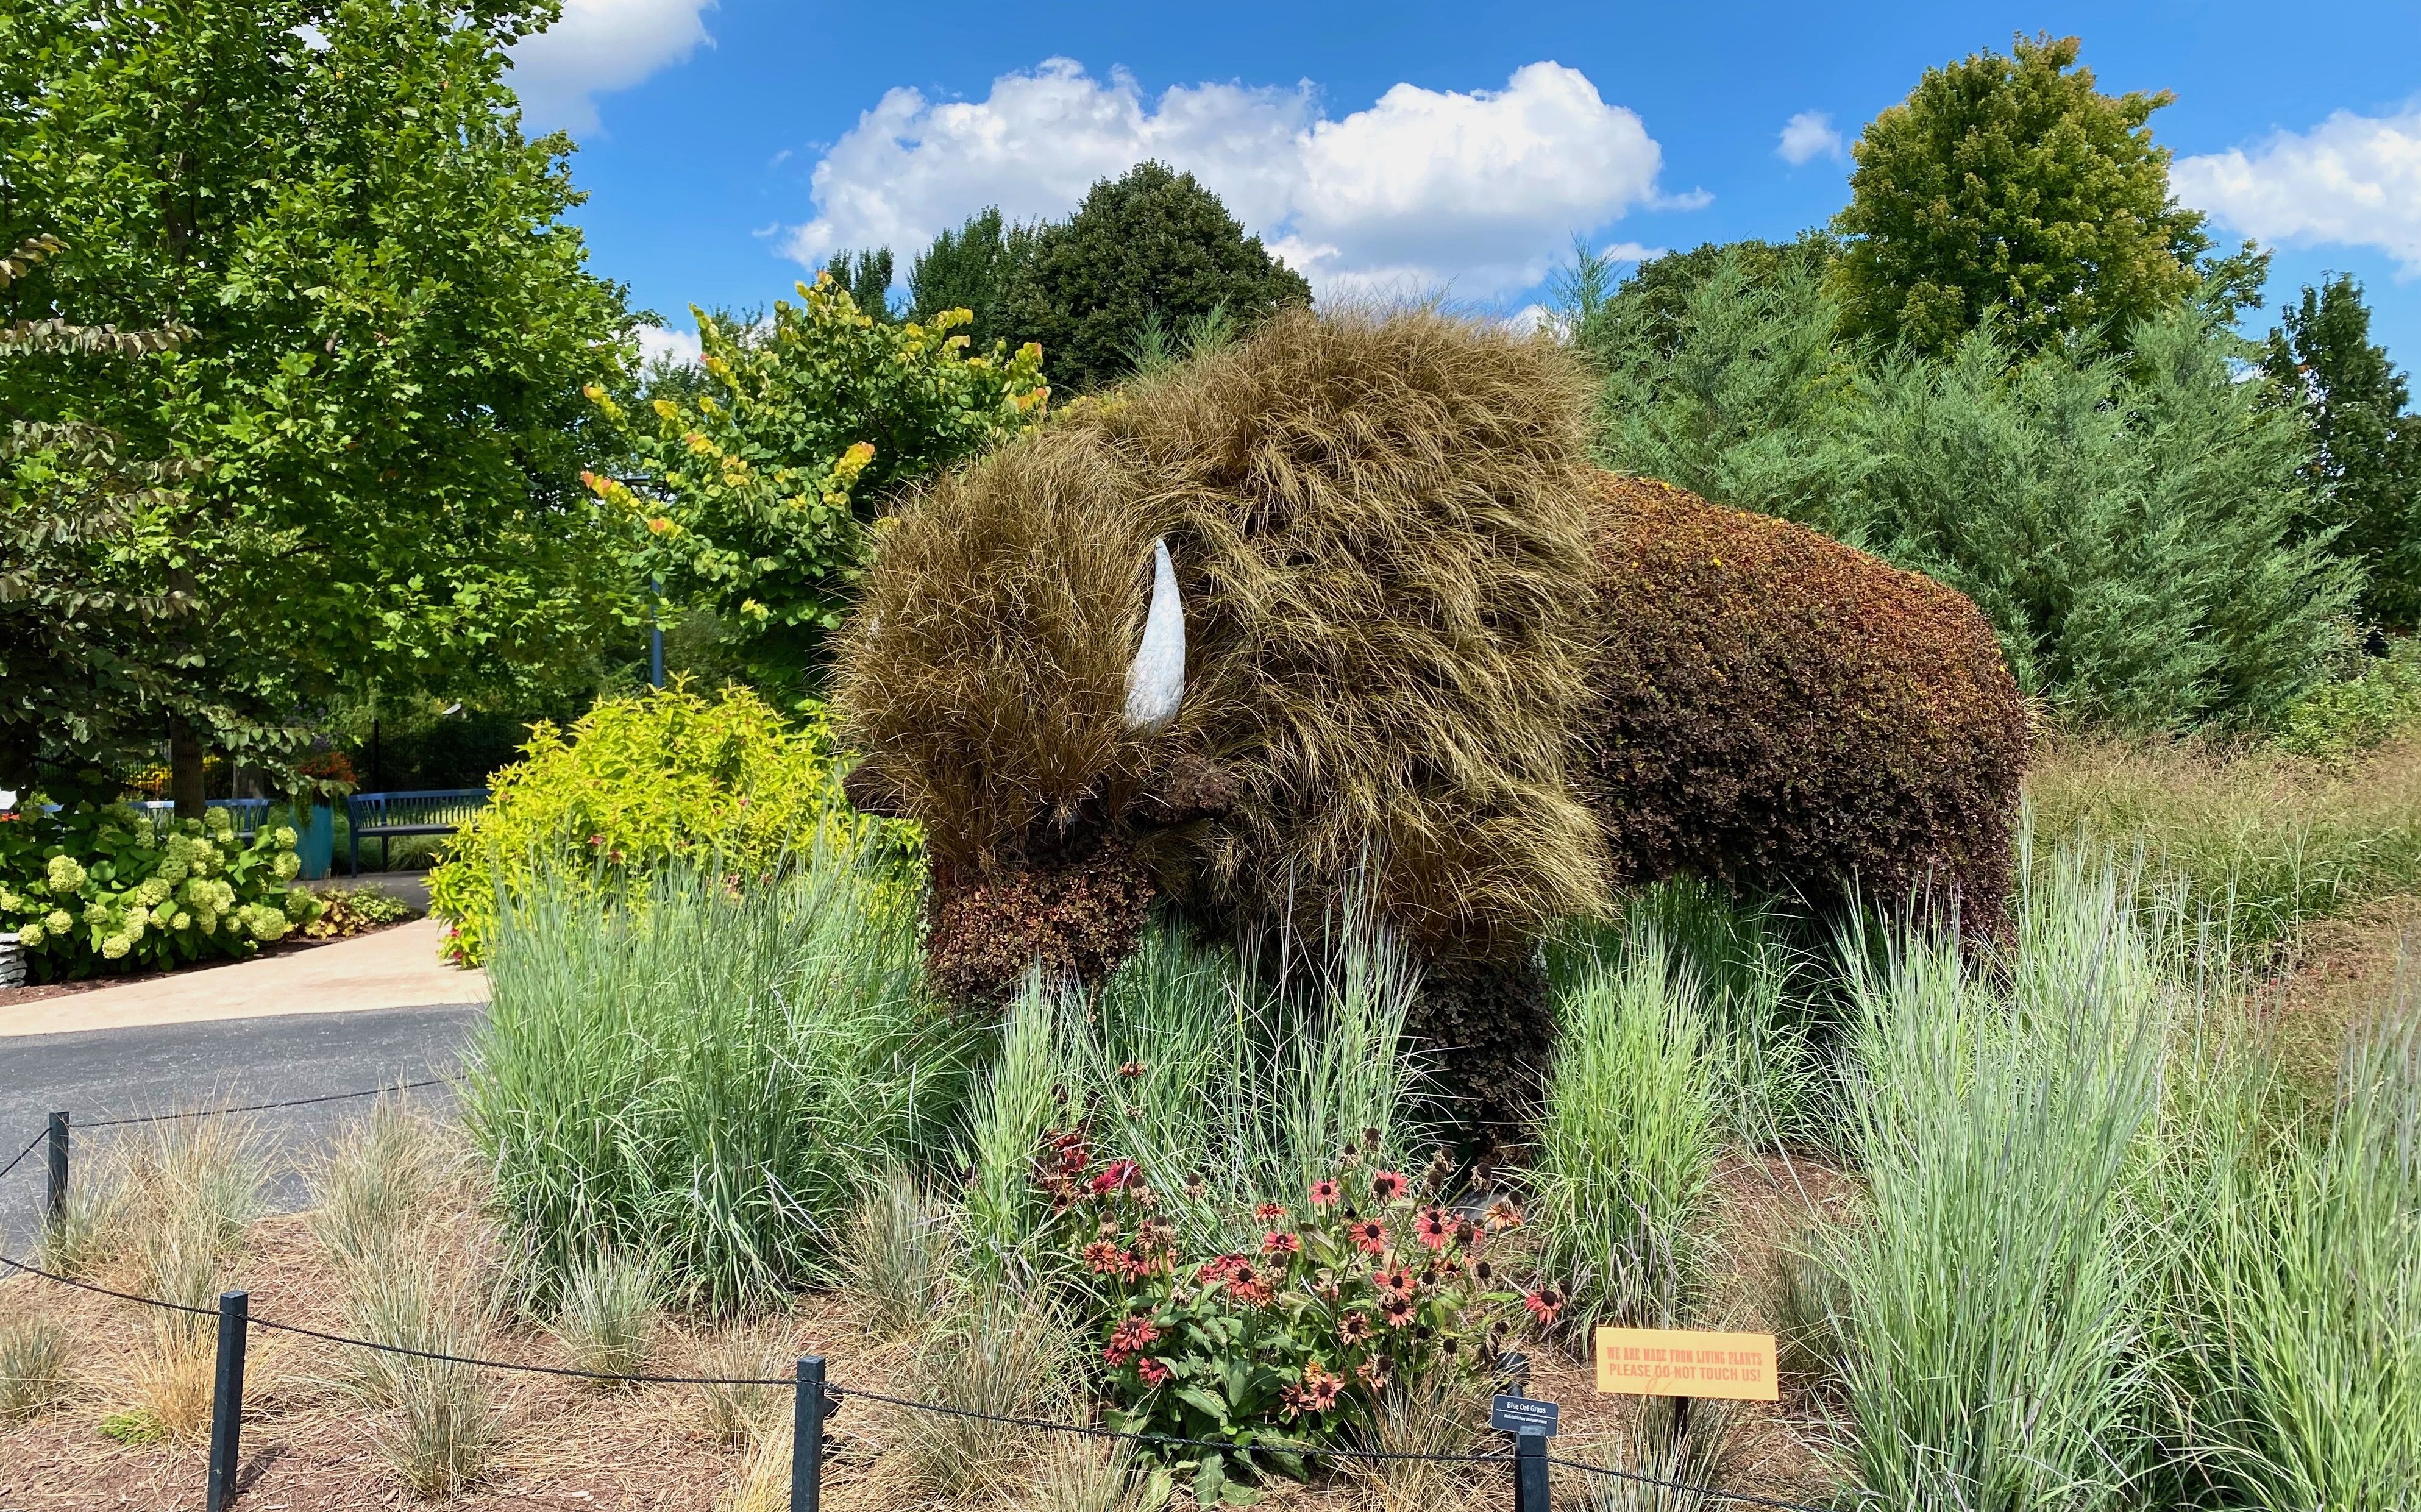 A bison topiary